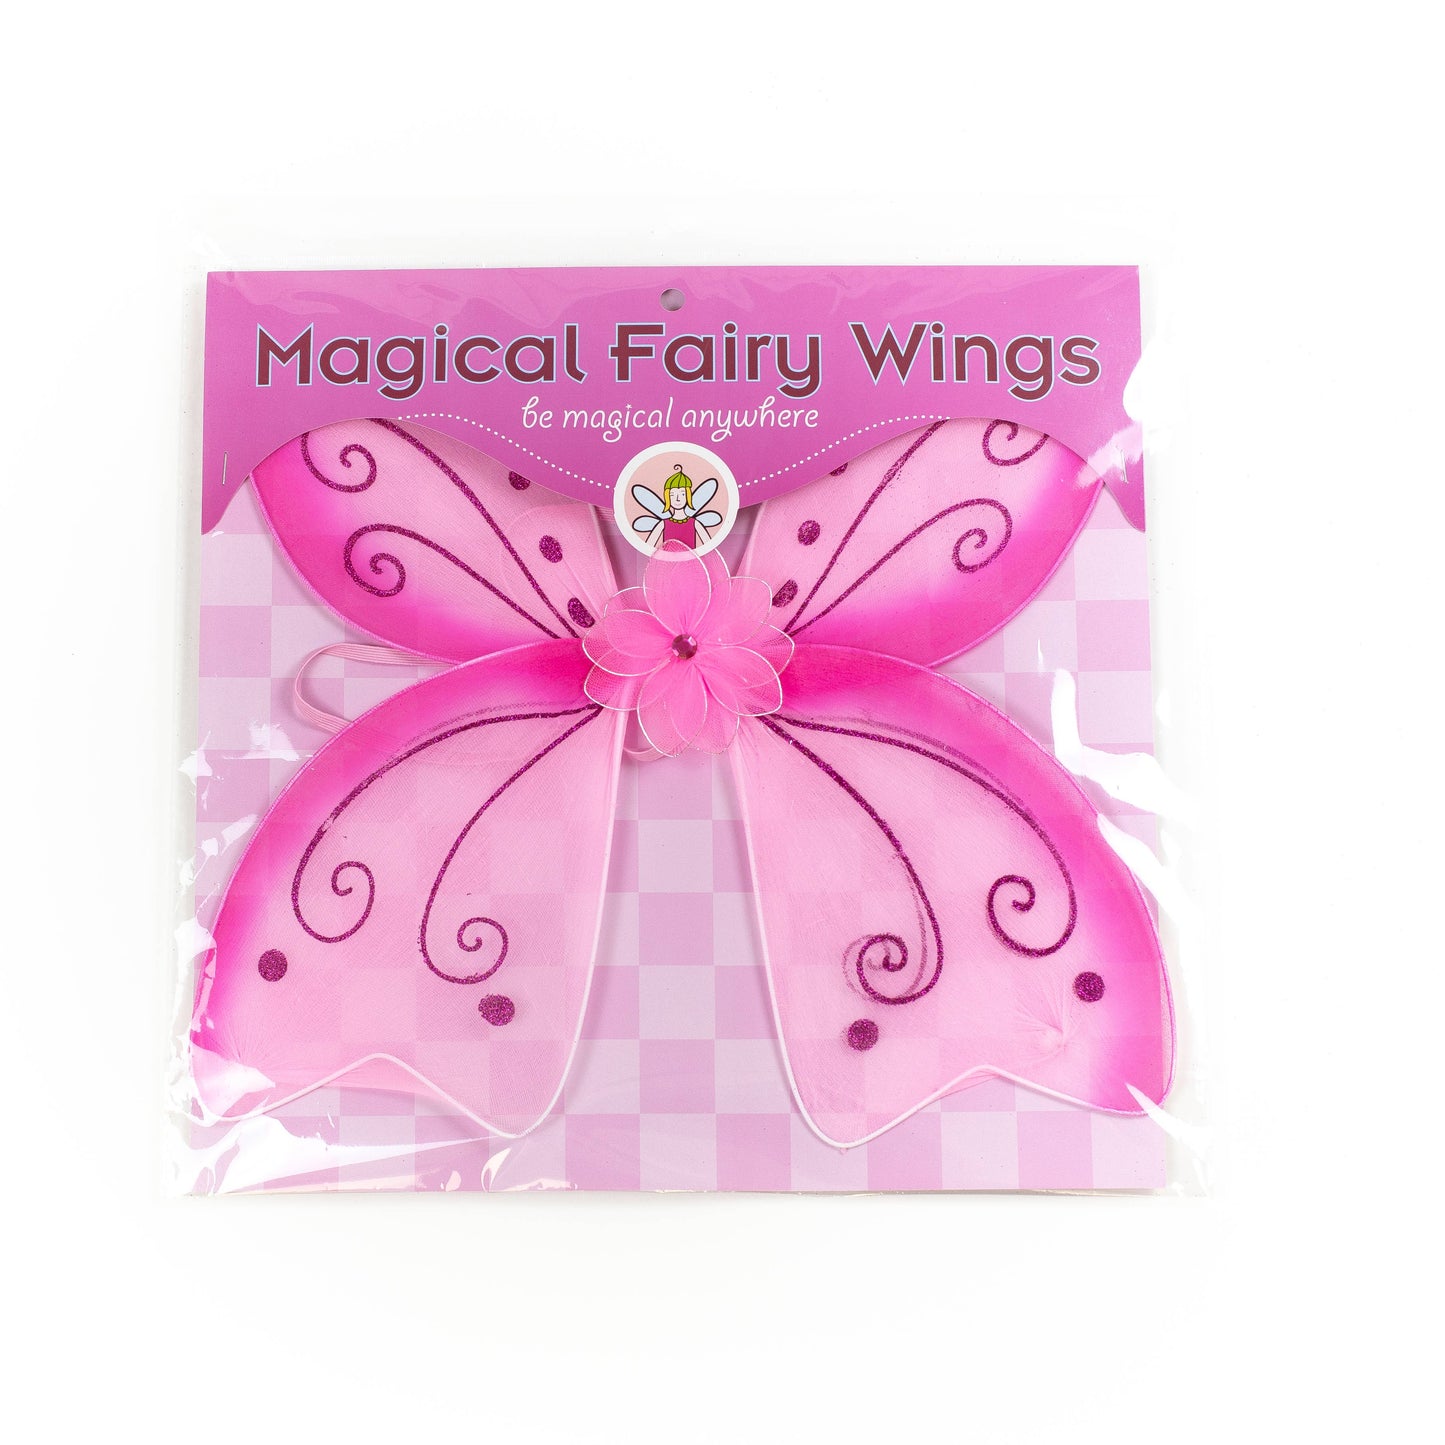 Jack Rabbit Creations magical fairy wings